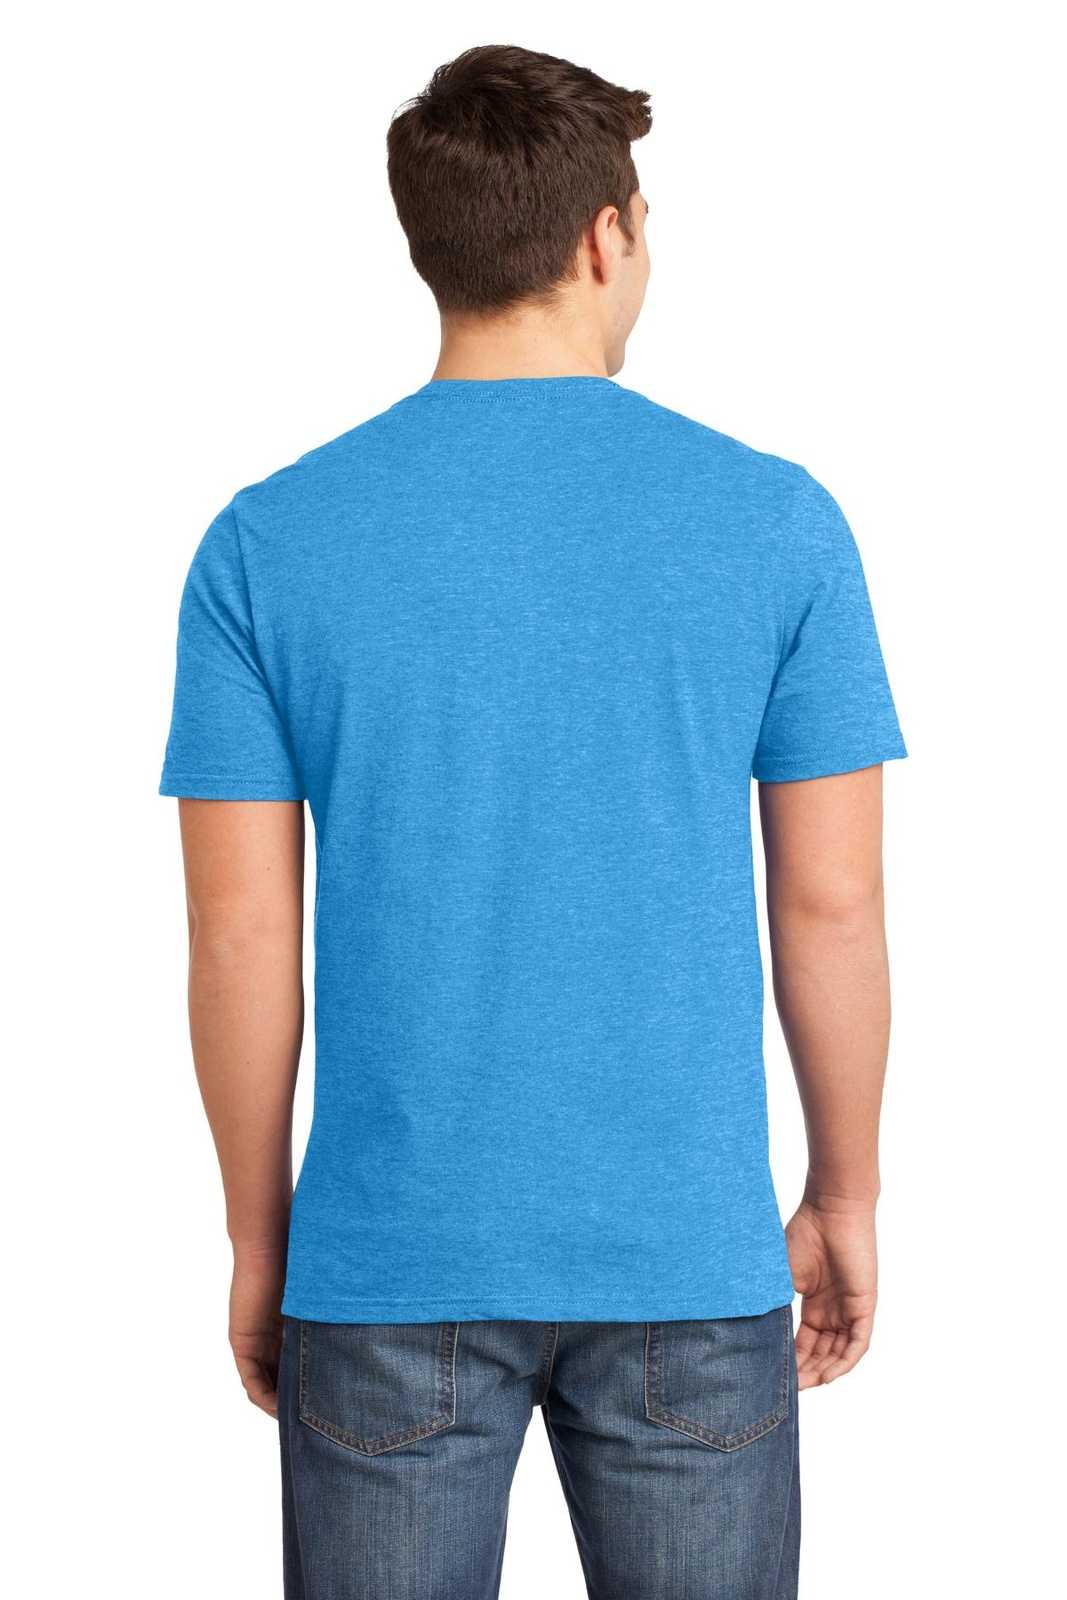 District DT6000 Very Important Tee - Heathered Bright Turquoise - HIT a Double - 1